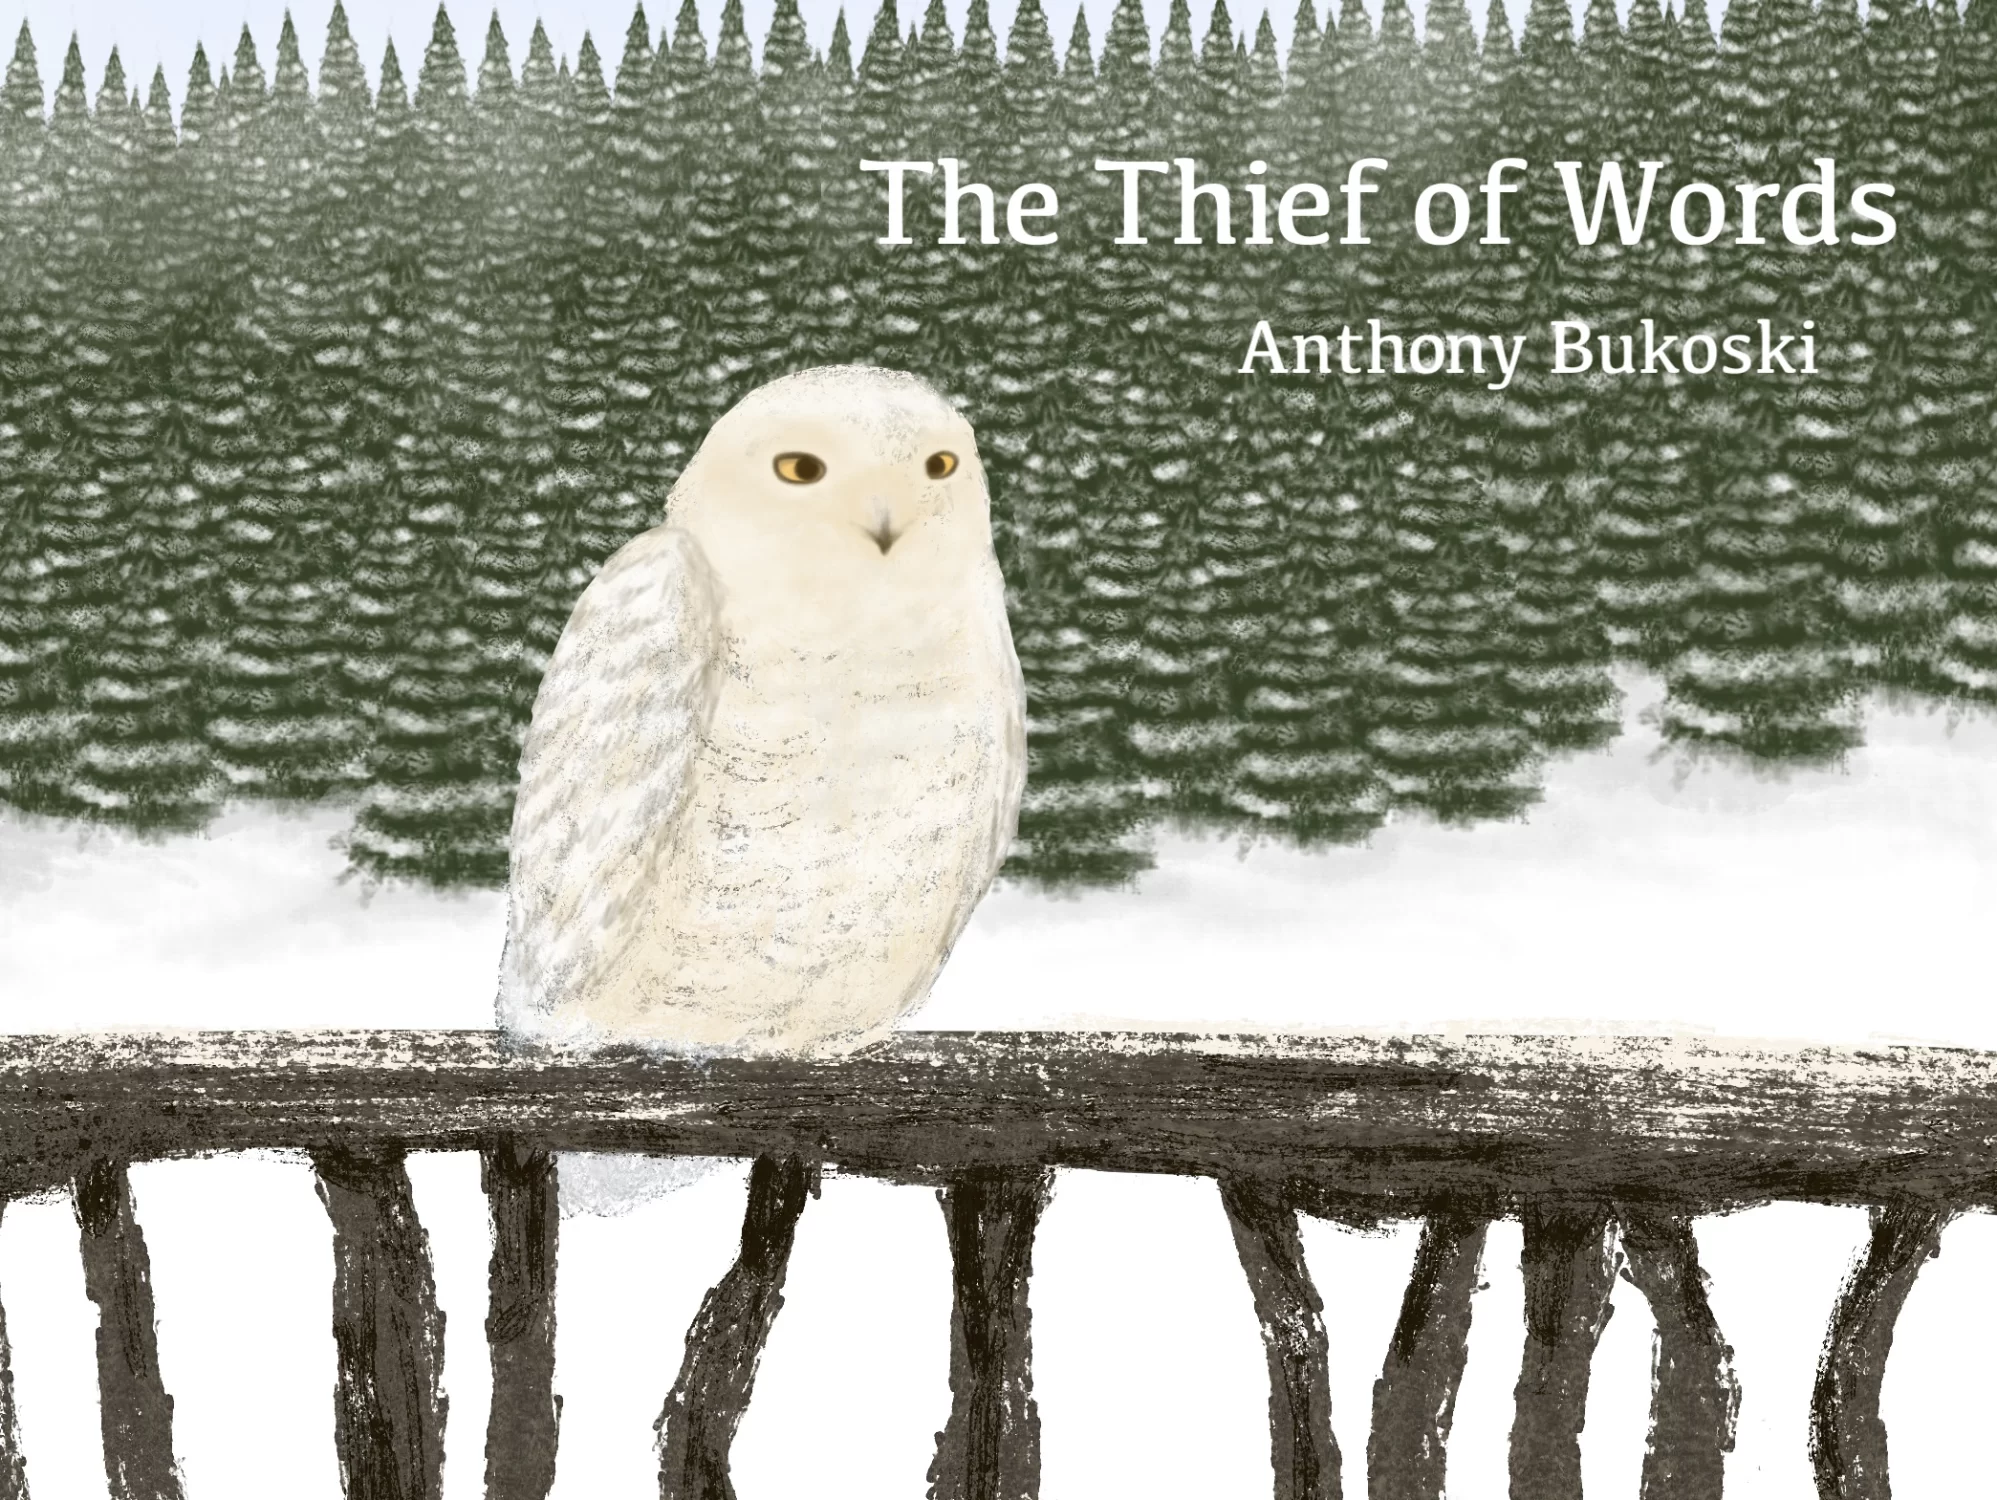 The Thief of Words by Anthony Bukoski